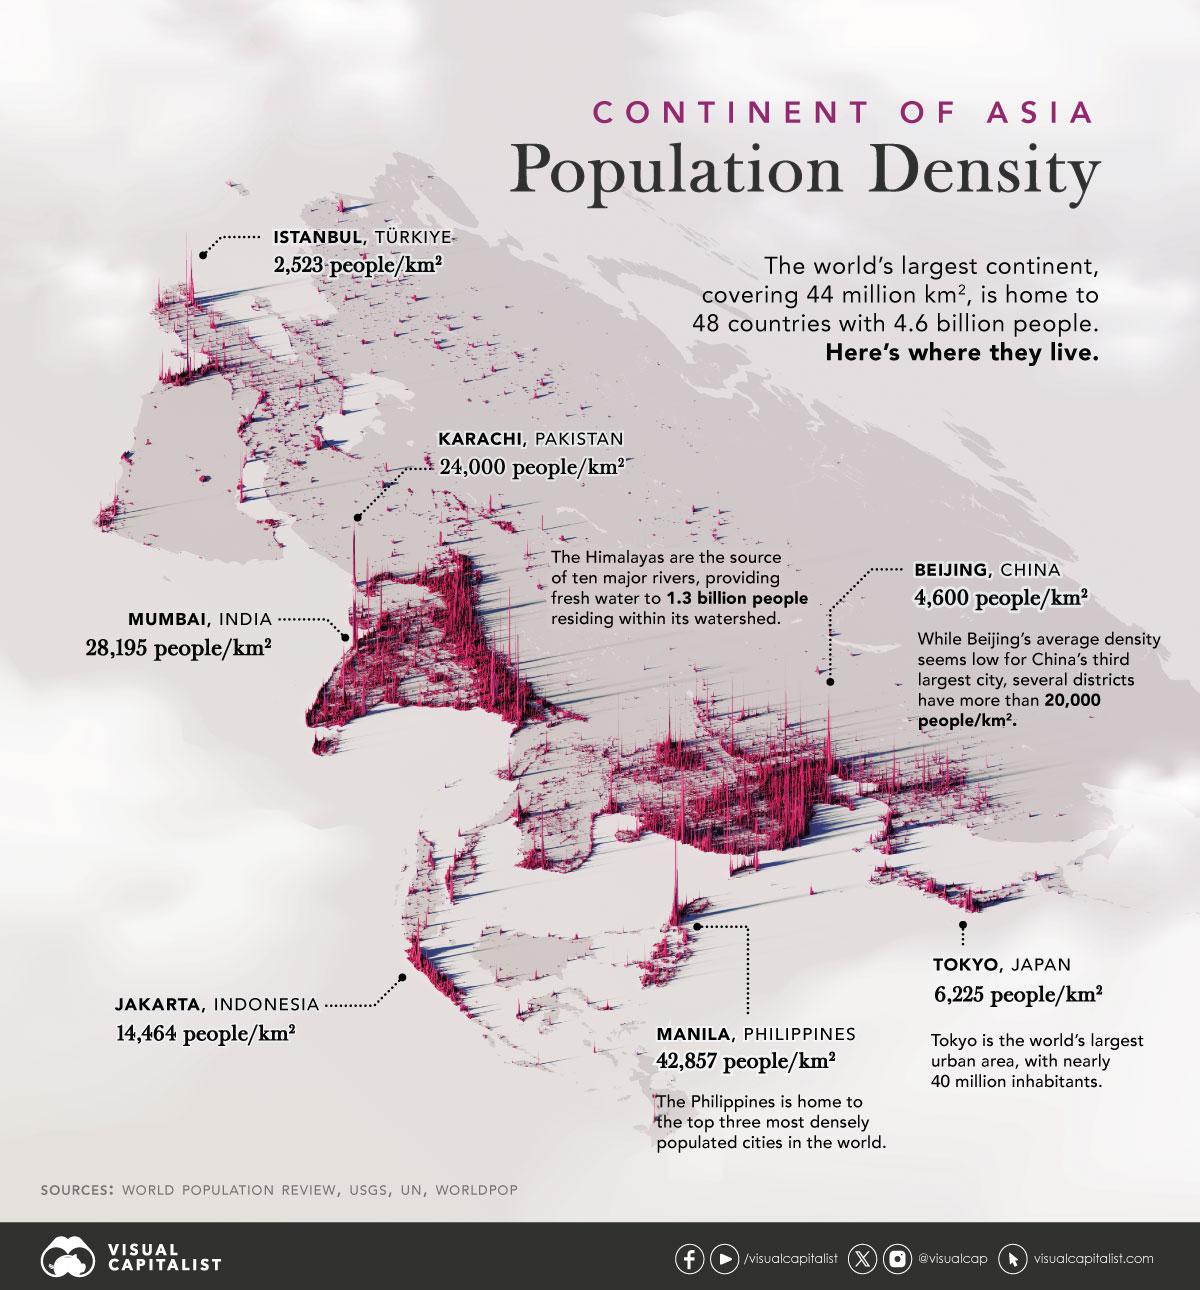 Mapped: Asia’s Population Patterns by Density